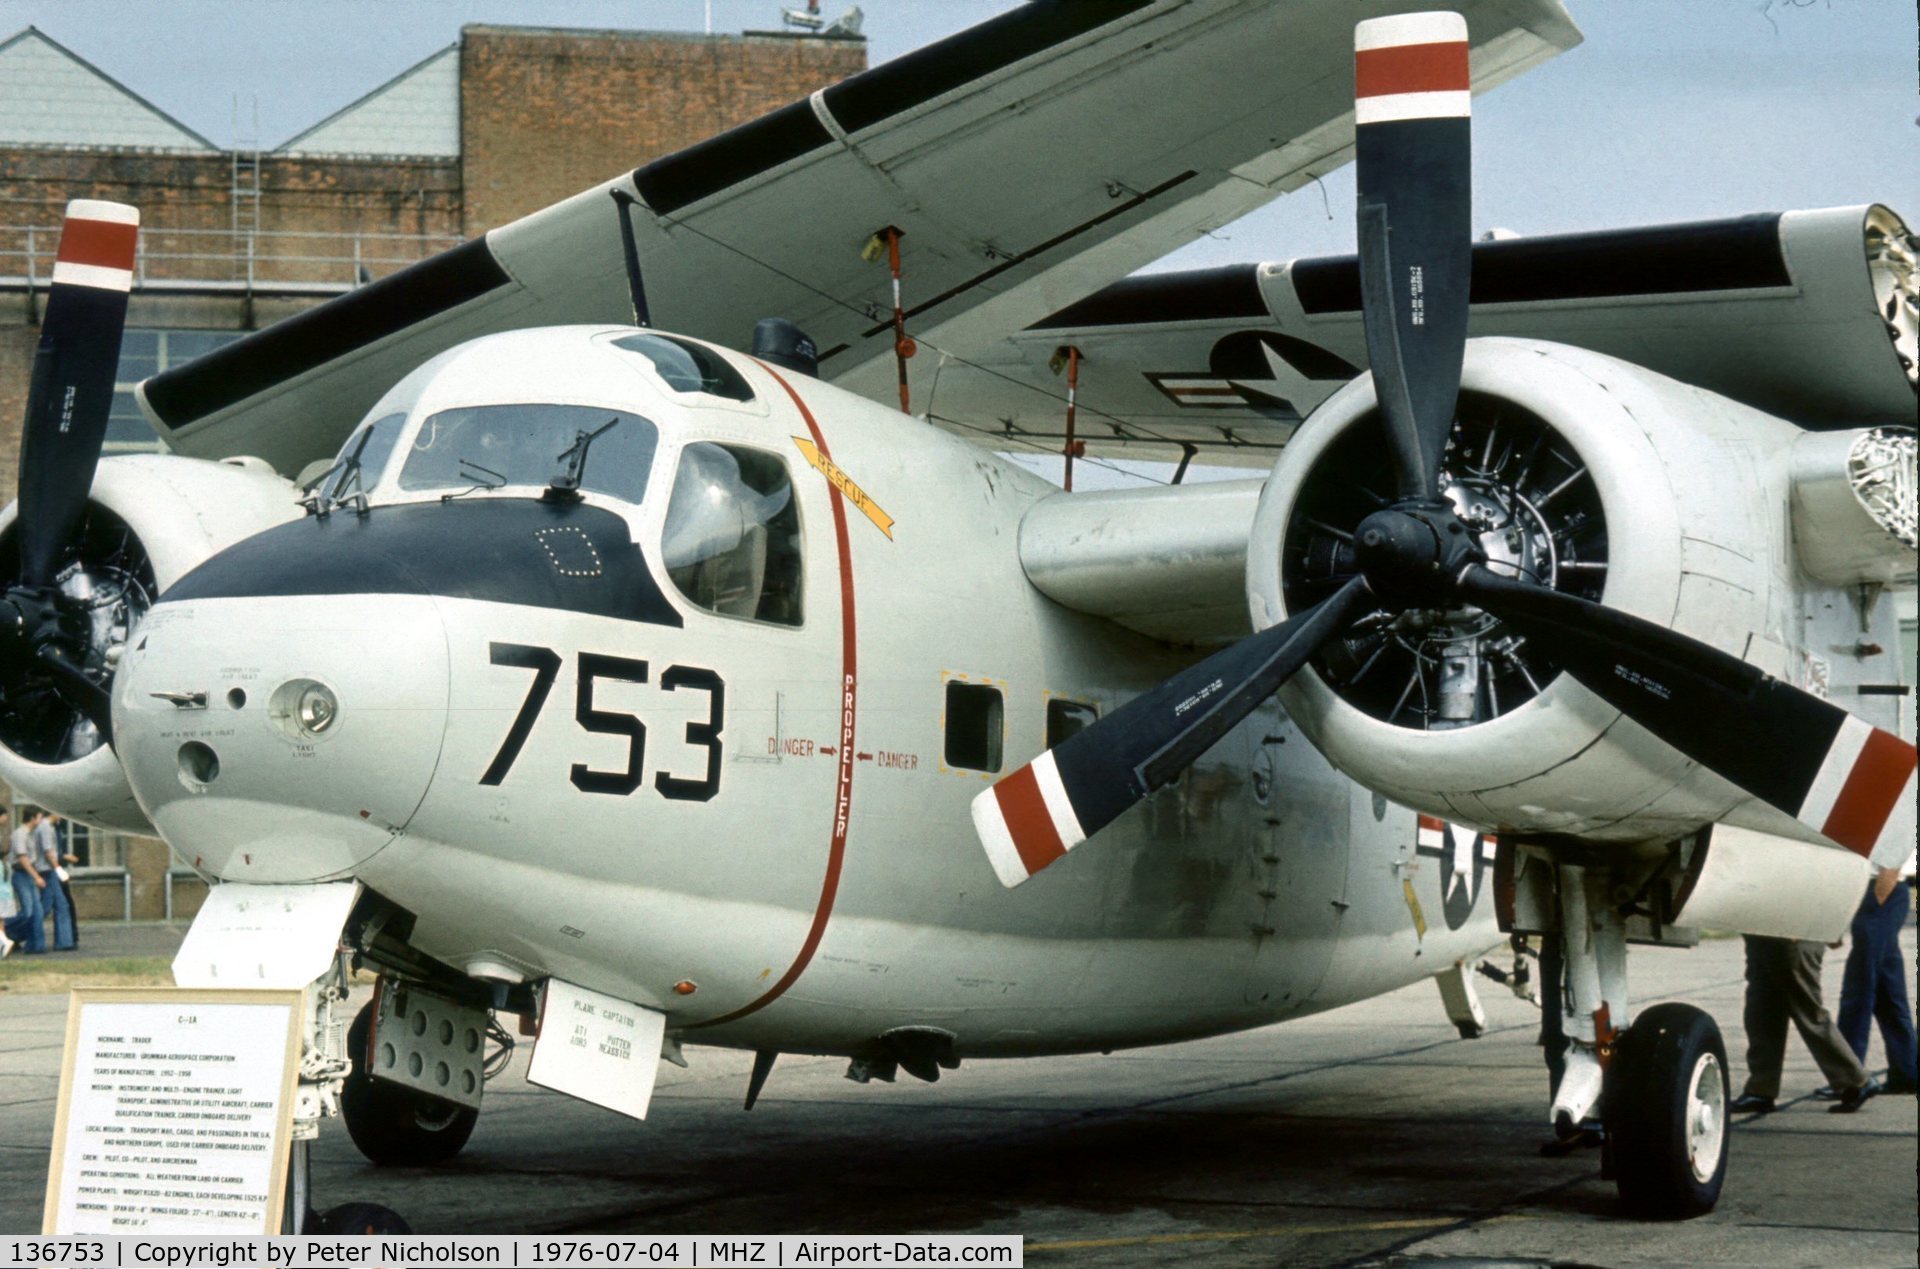 136753, Grumman C-1A Trader C/N 6, Another view of the Naval Air Facility at Mildenhall's C-1A Trader at the 1976 Air Fete.